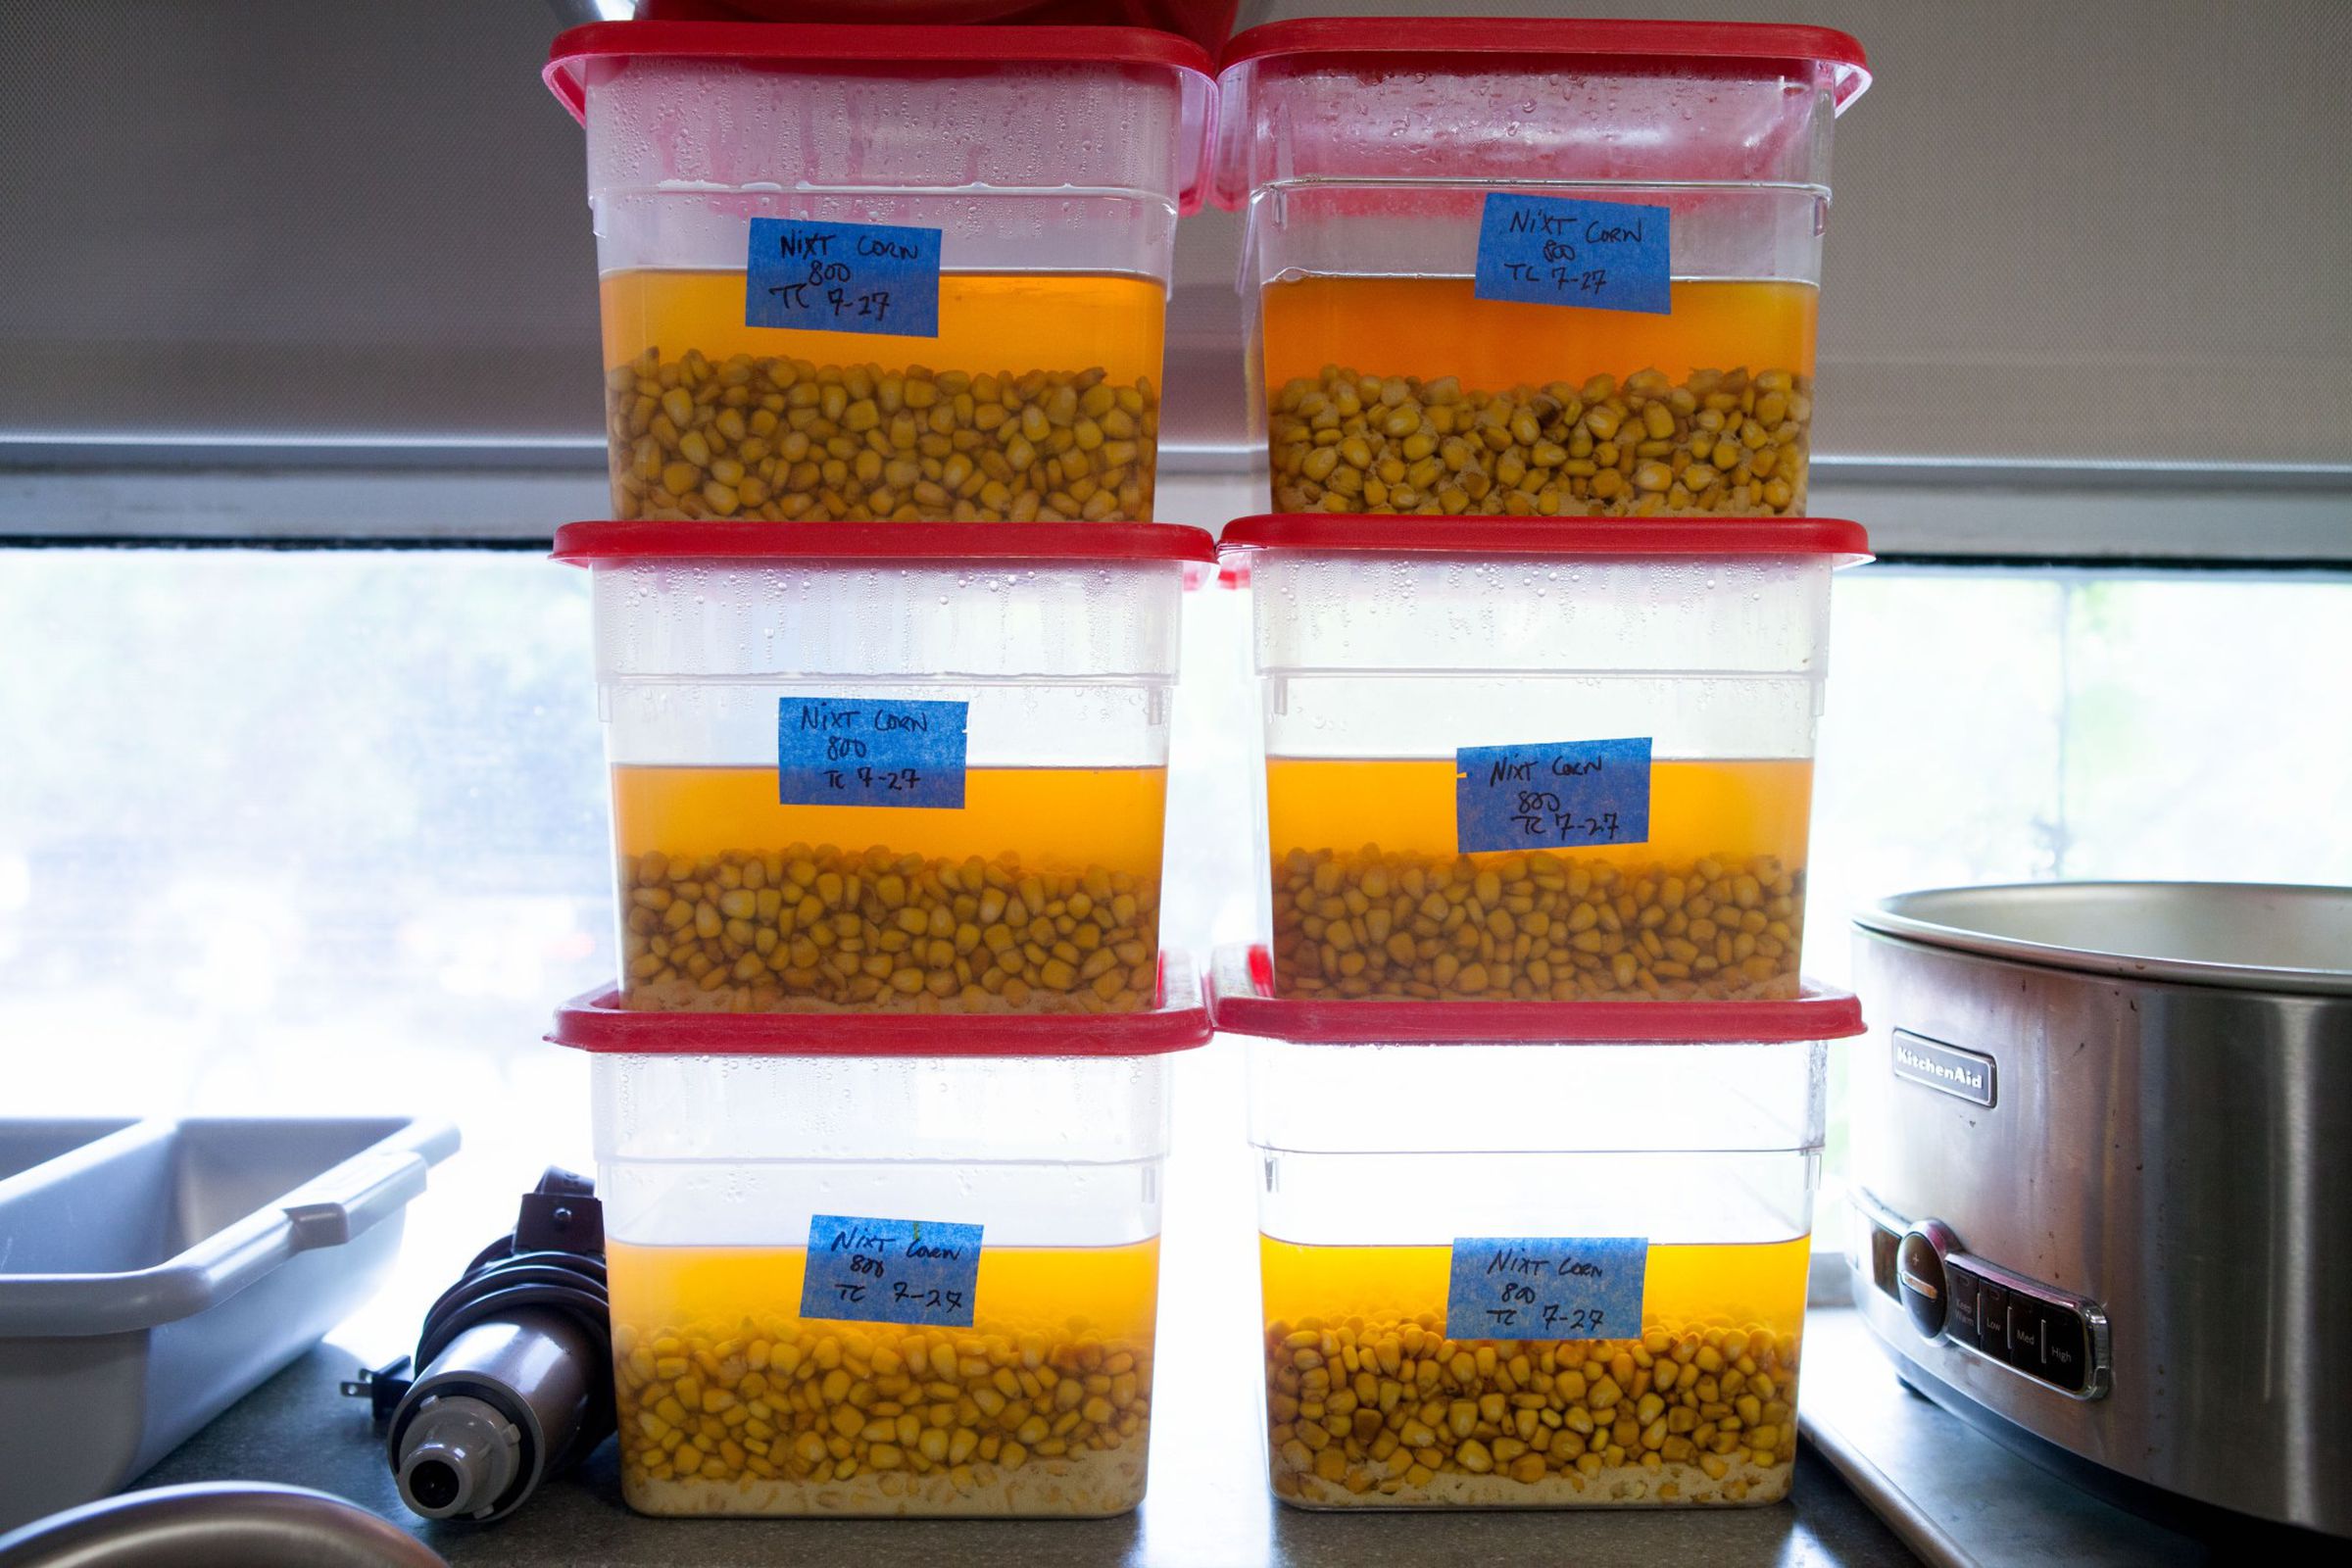 Plastic tubs with corn kernels soaking in a nixtamalizing solution, stacked on top of each other on the counter in the Cook's Science Test Kitchen.